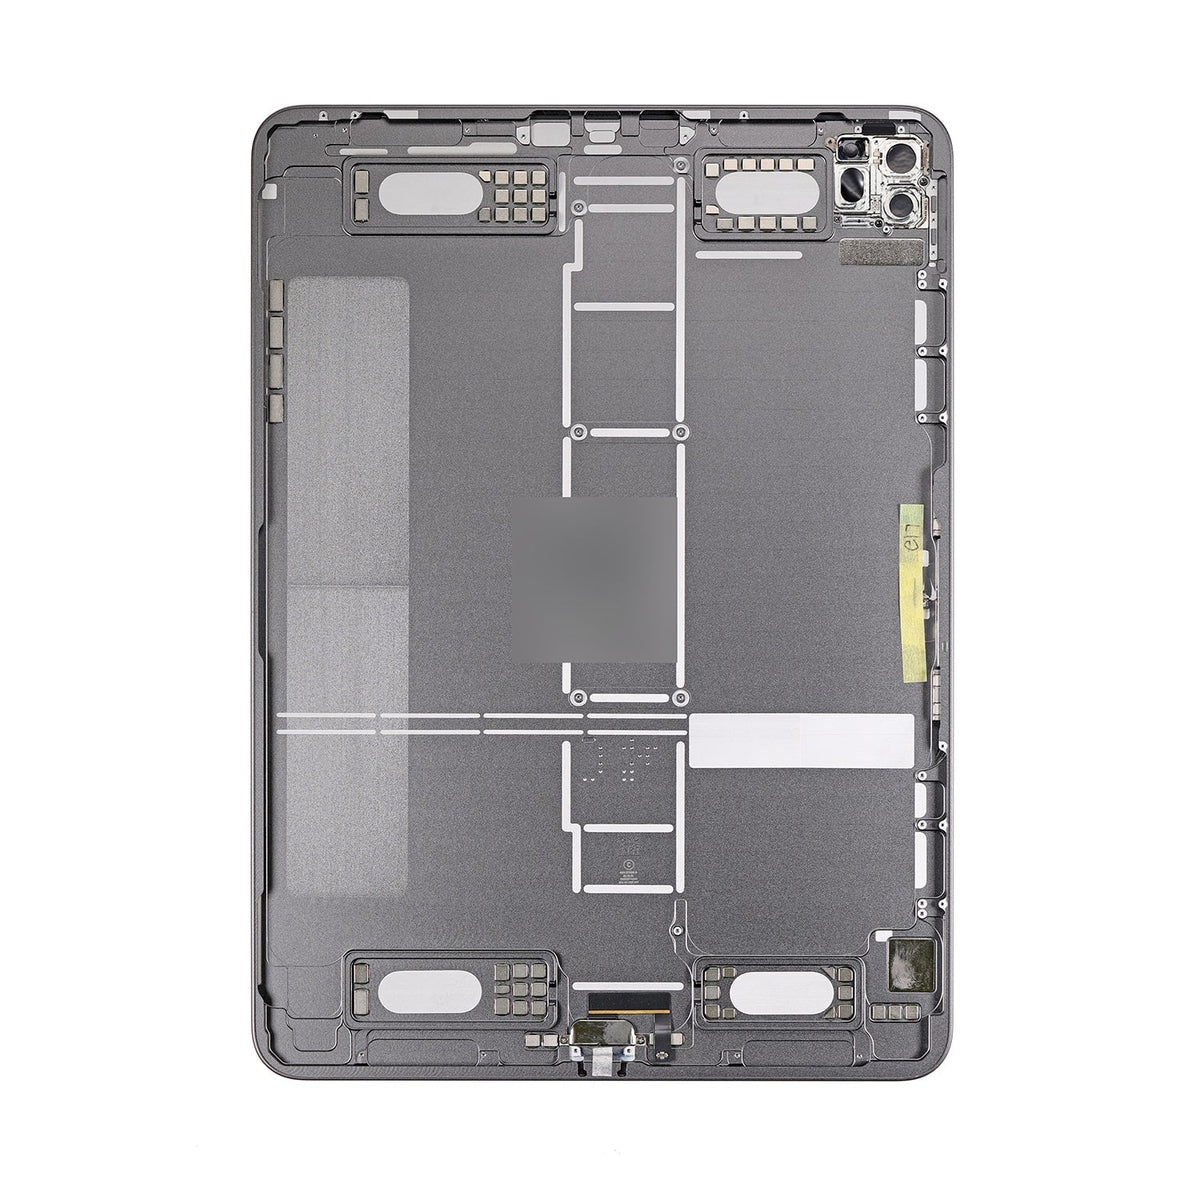 BACK COVER WIFI VERSION FOR IPAD PRO 11(2ND) - GRAY